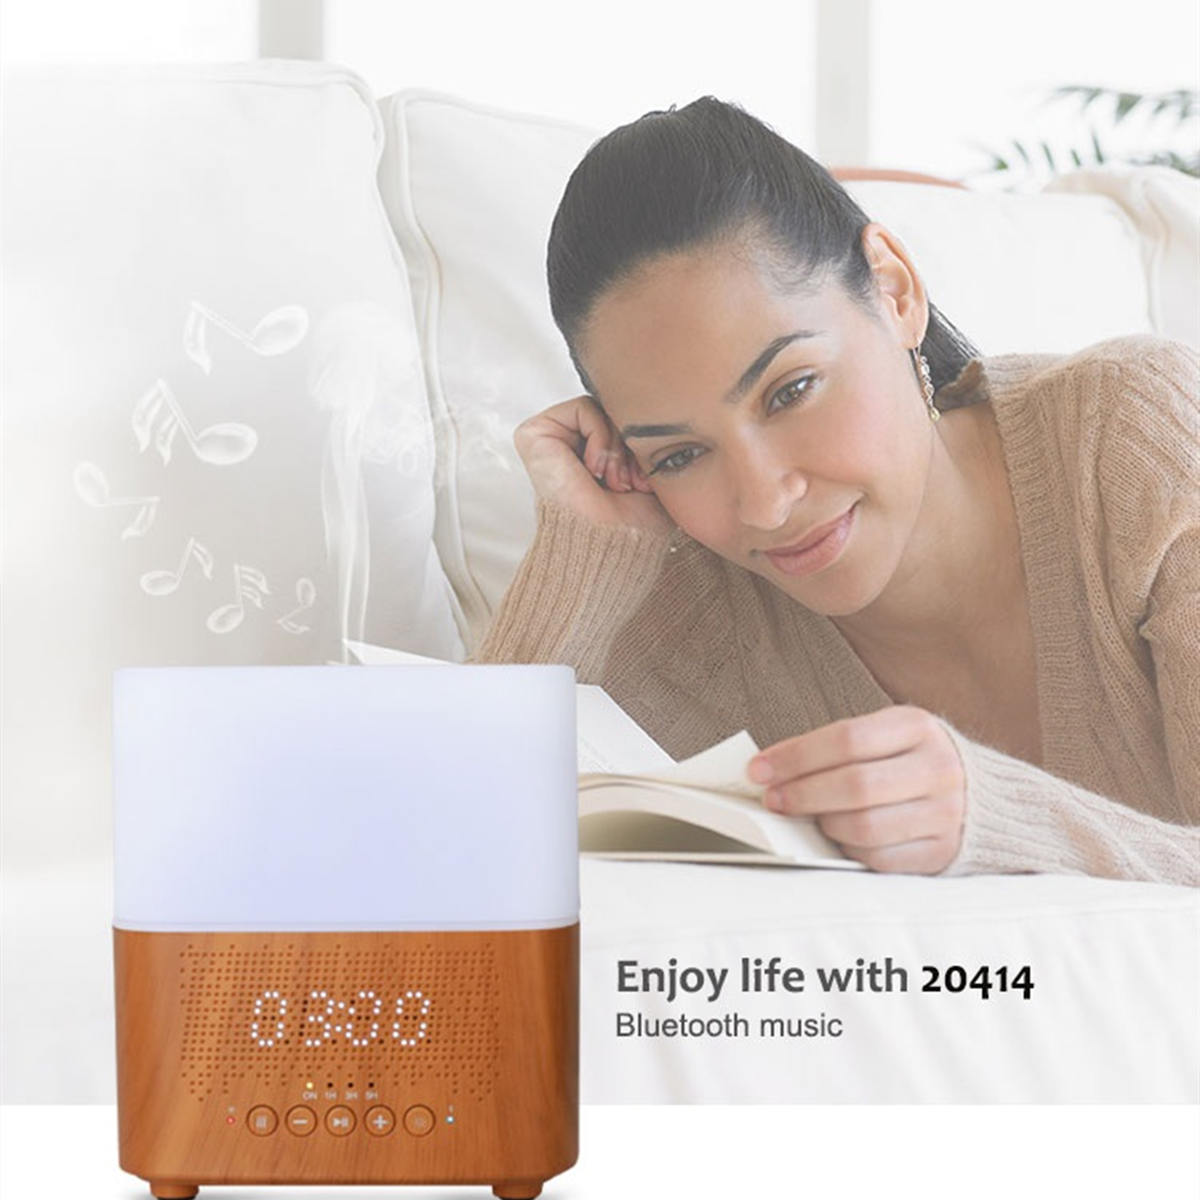 aroma diffuser with speaker